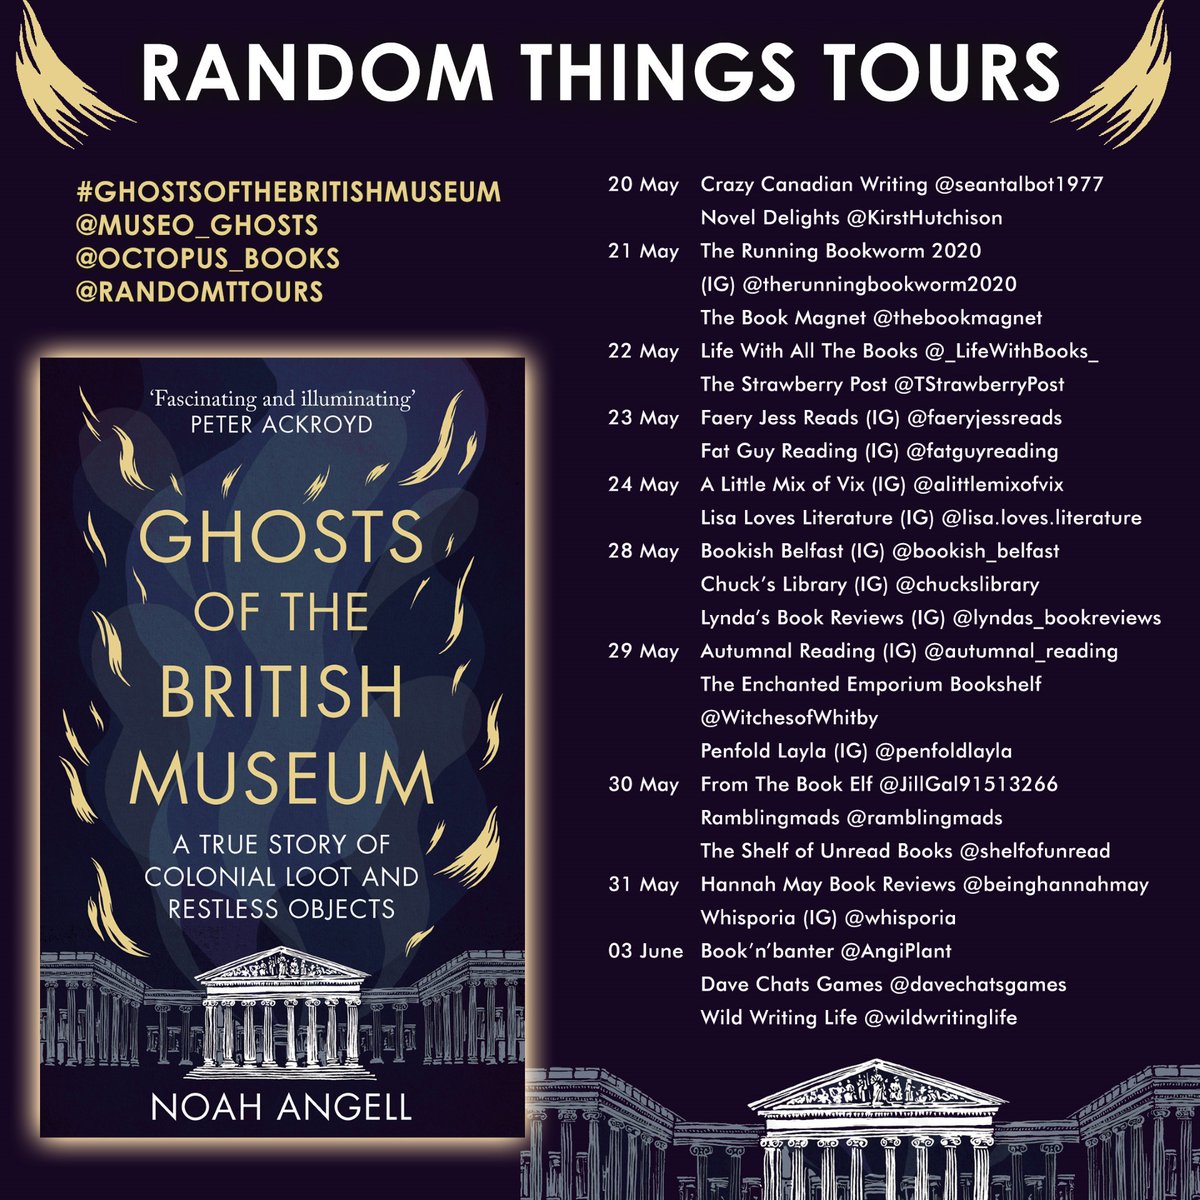 Thrilled to organise this #RandomThingsTours Blog Tour for #GhostsoftheBritishMuseum by @museo_ghosts with @Octopus_Books Begins 20 May @ramblingmads @shelfofunread @AngiPlant @wildwritinglife